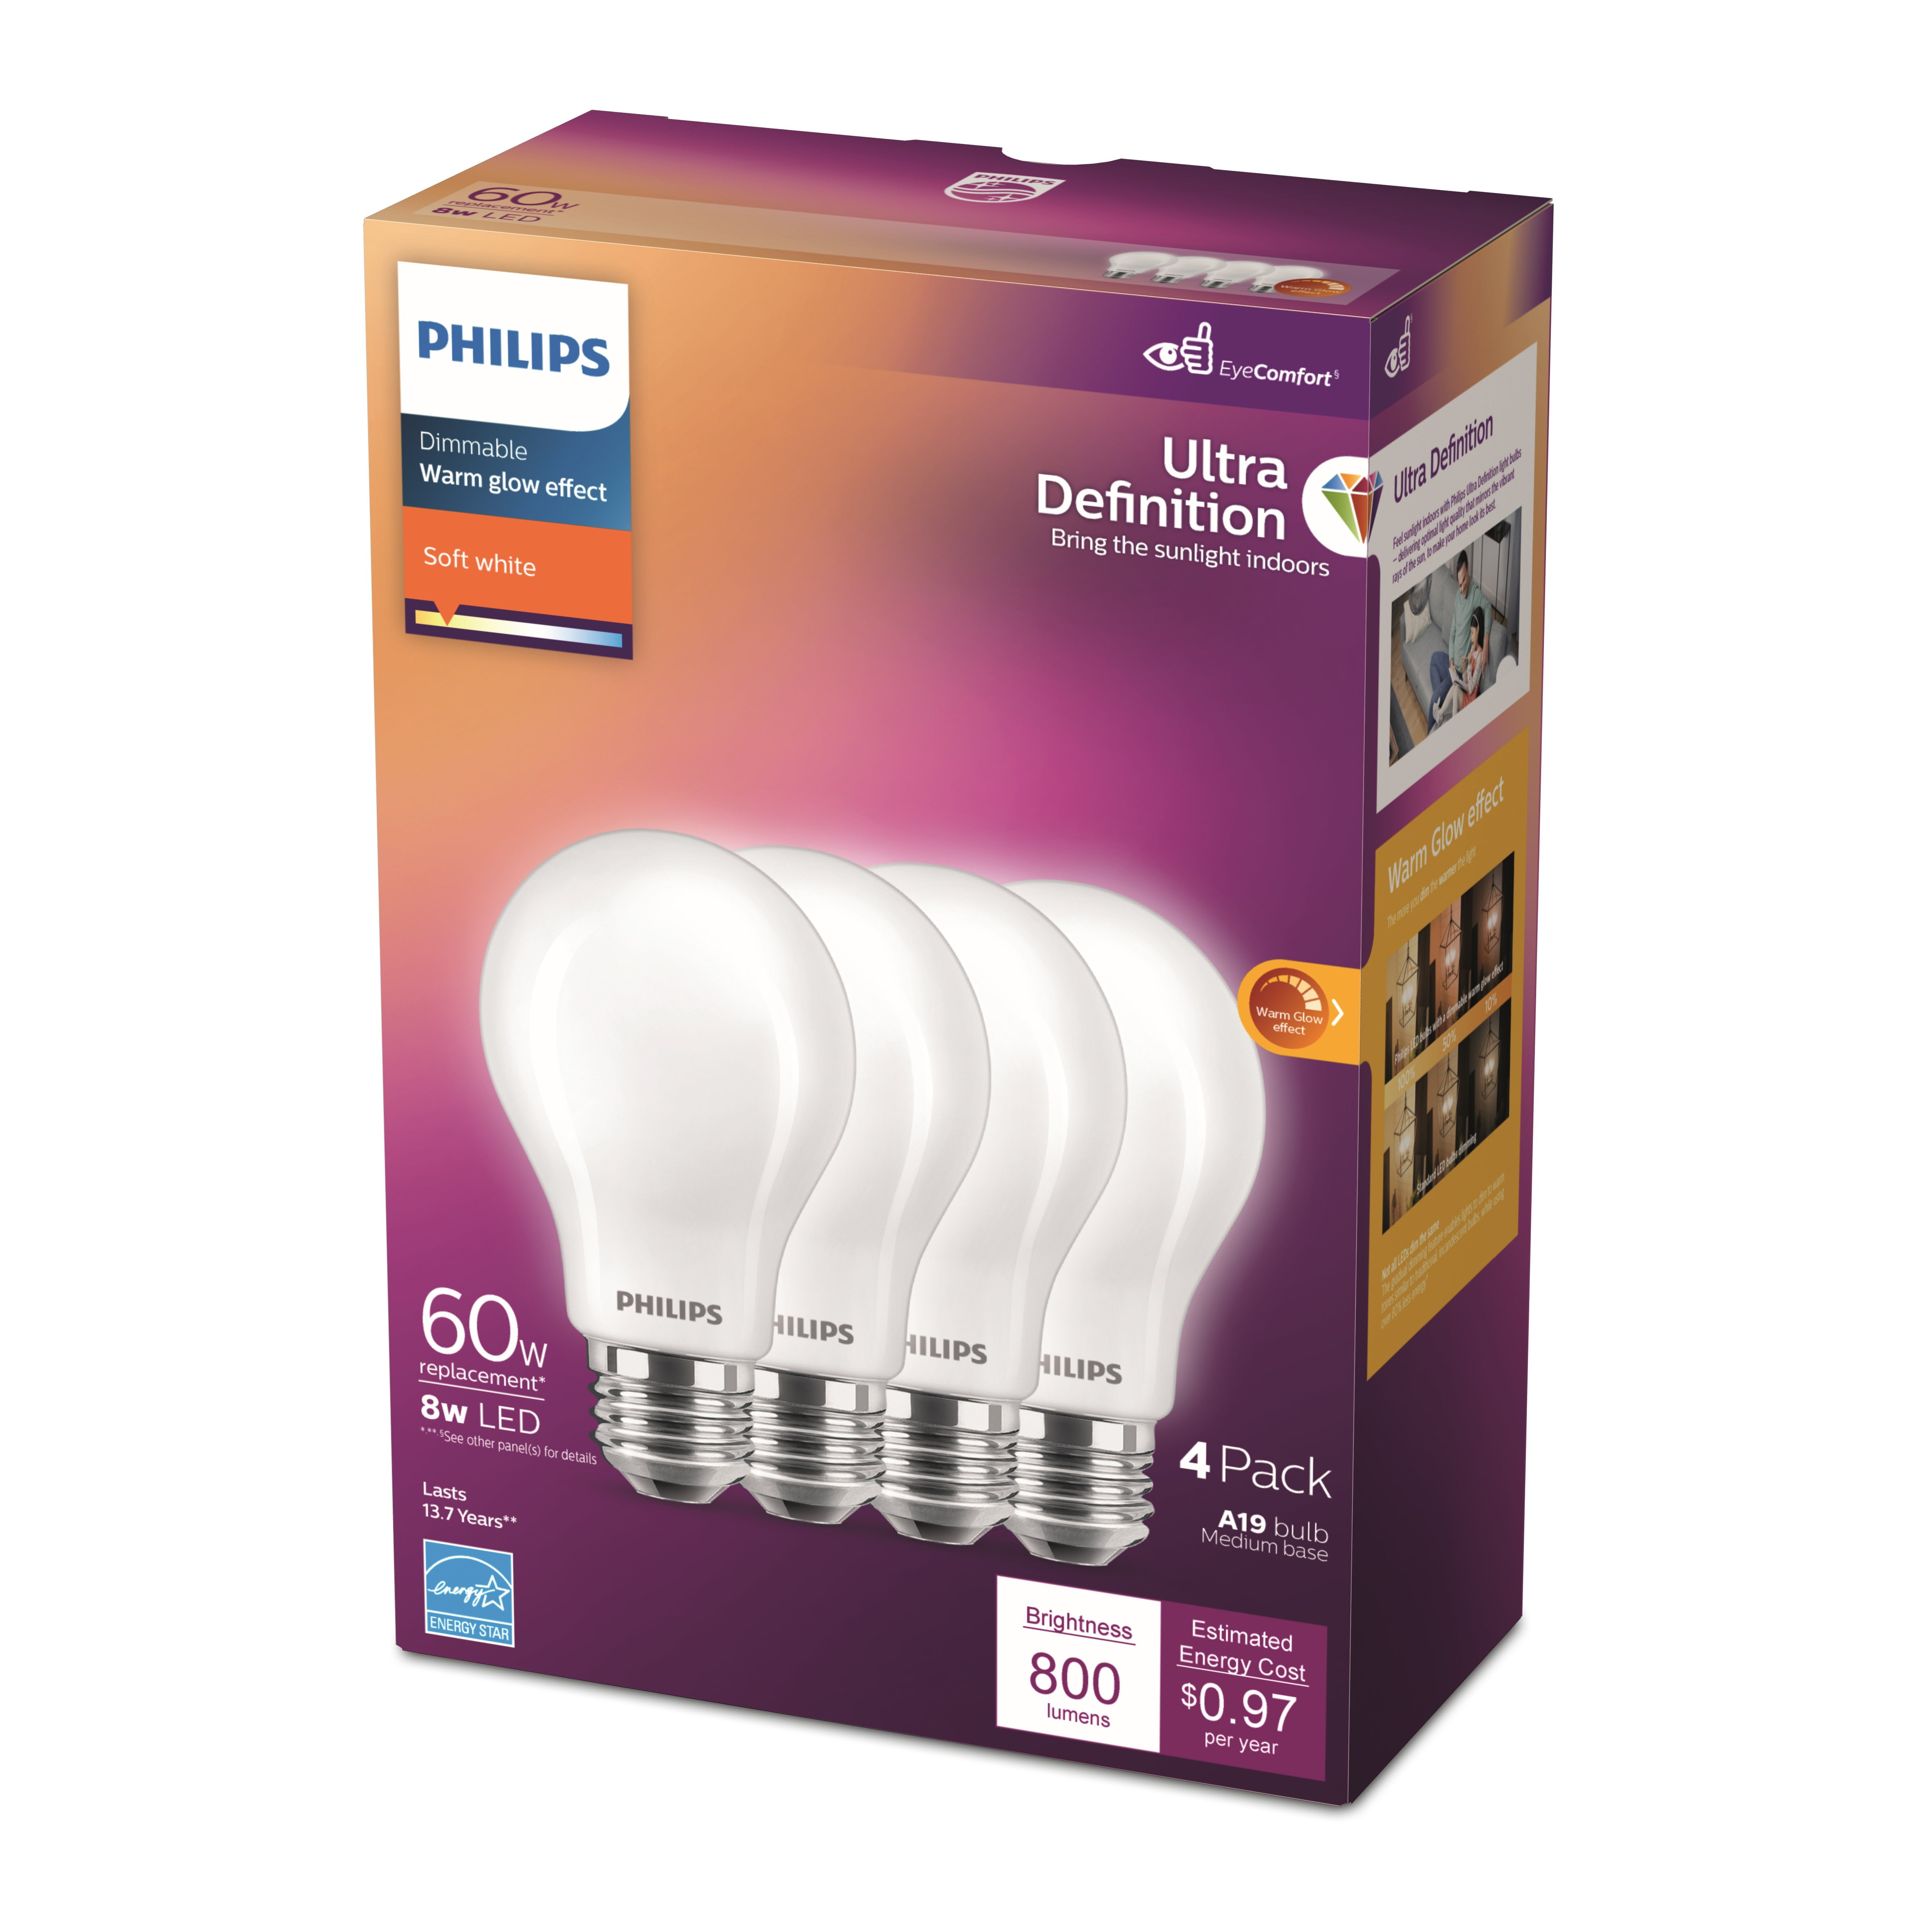 Philips Lightolier 6776 Opelex Incandescent  for wall or ceiling mounted light